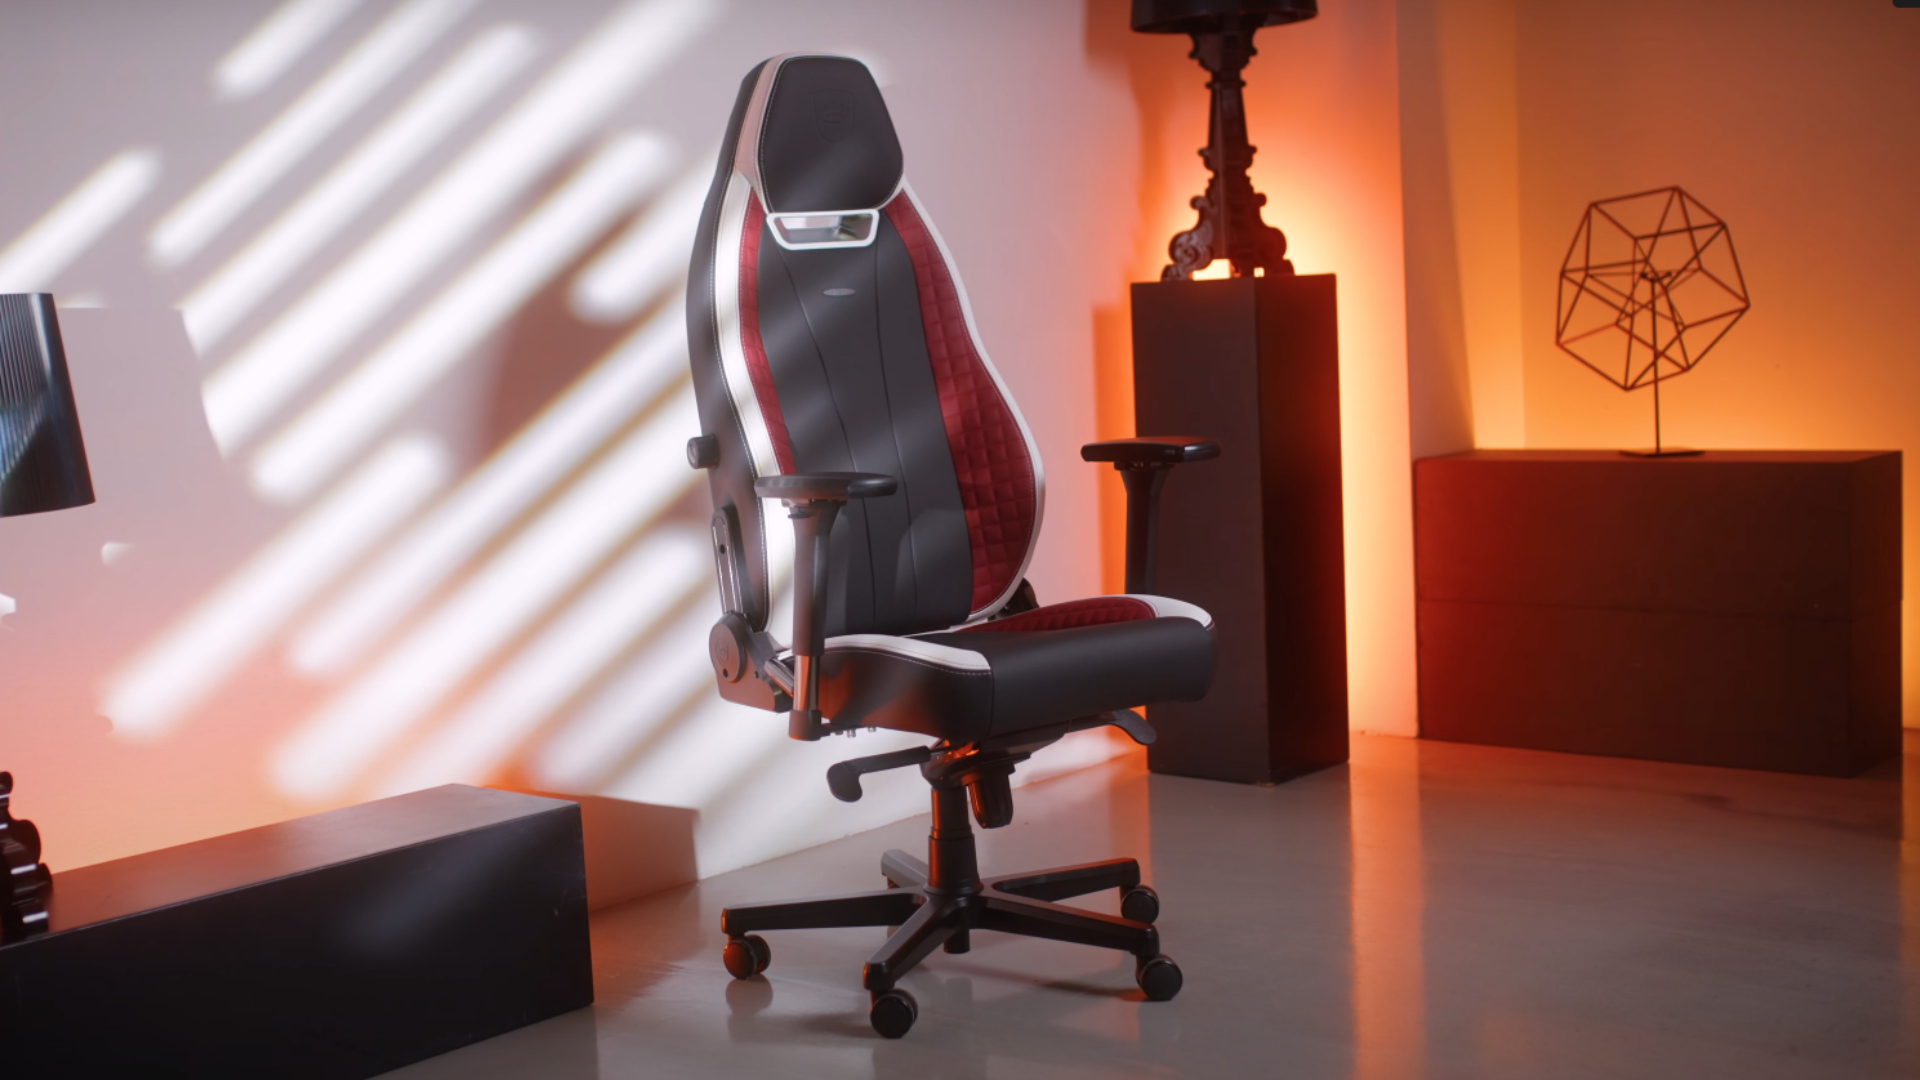 The Noblechair Legend gaming chair in a strangely lit room.